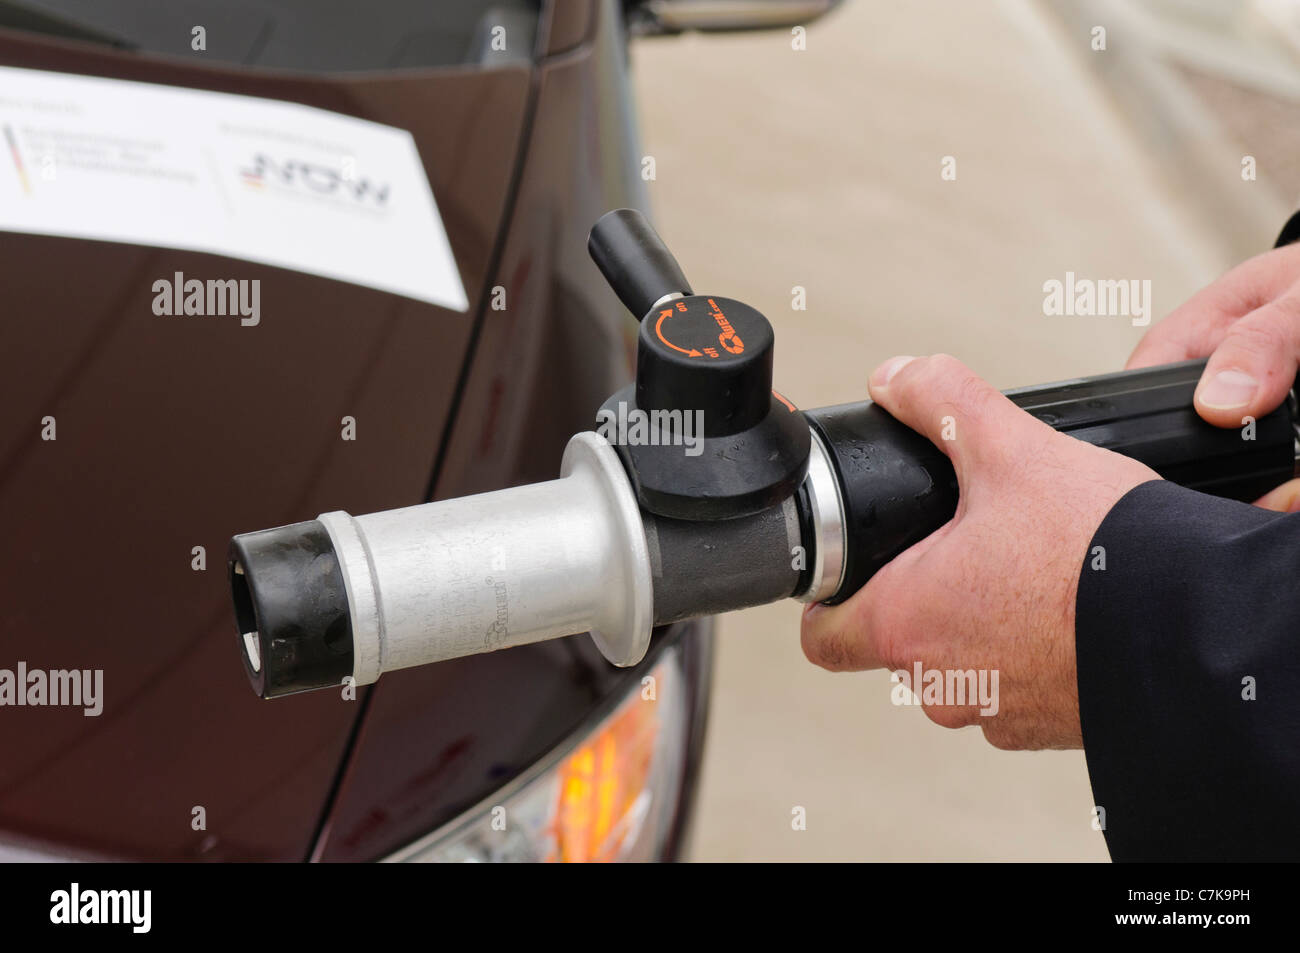 Man holding a hydrogen fuel filler nozzle for refueling hydrogen powered vehicles Stock Photo